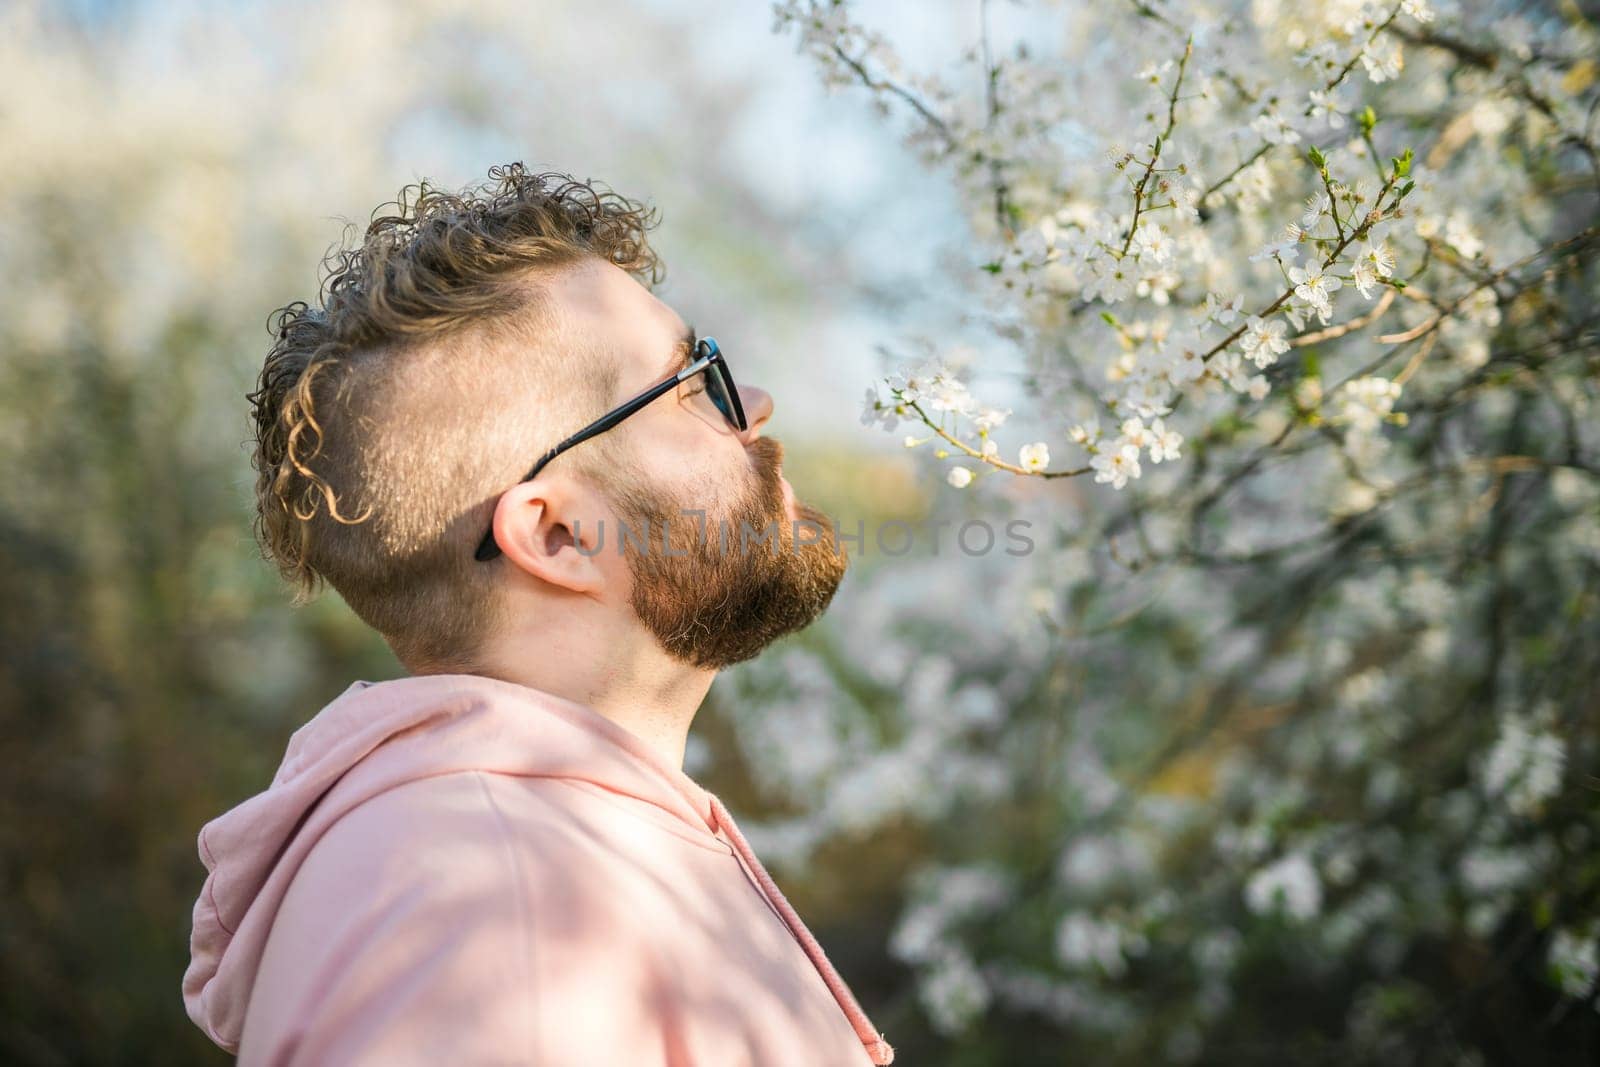 Portrait of curly millennial man inhales the fragrance of spring flowers of blooming jasmine or cherry tree. Spring time concept. Copy space by Satura86